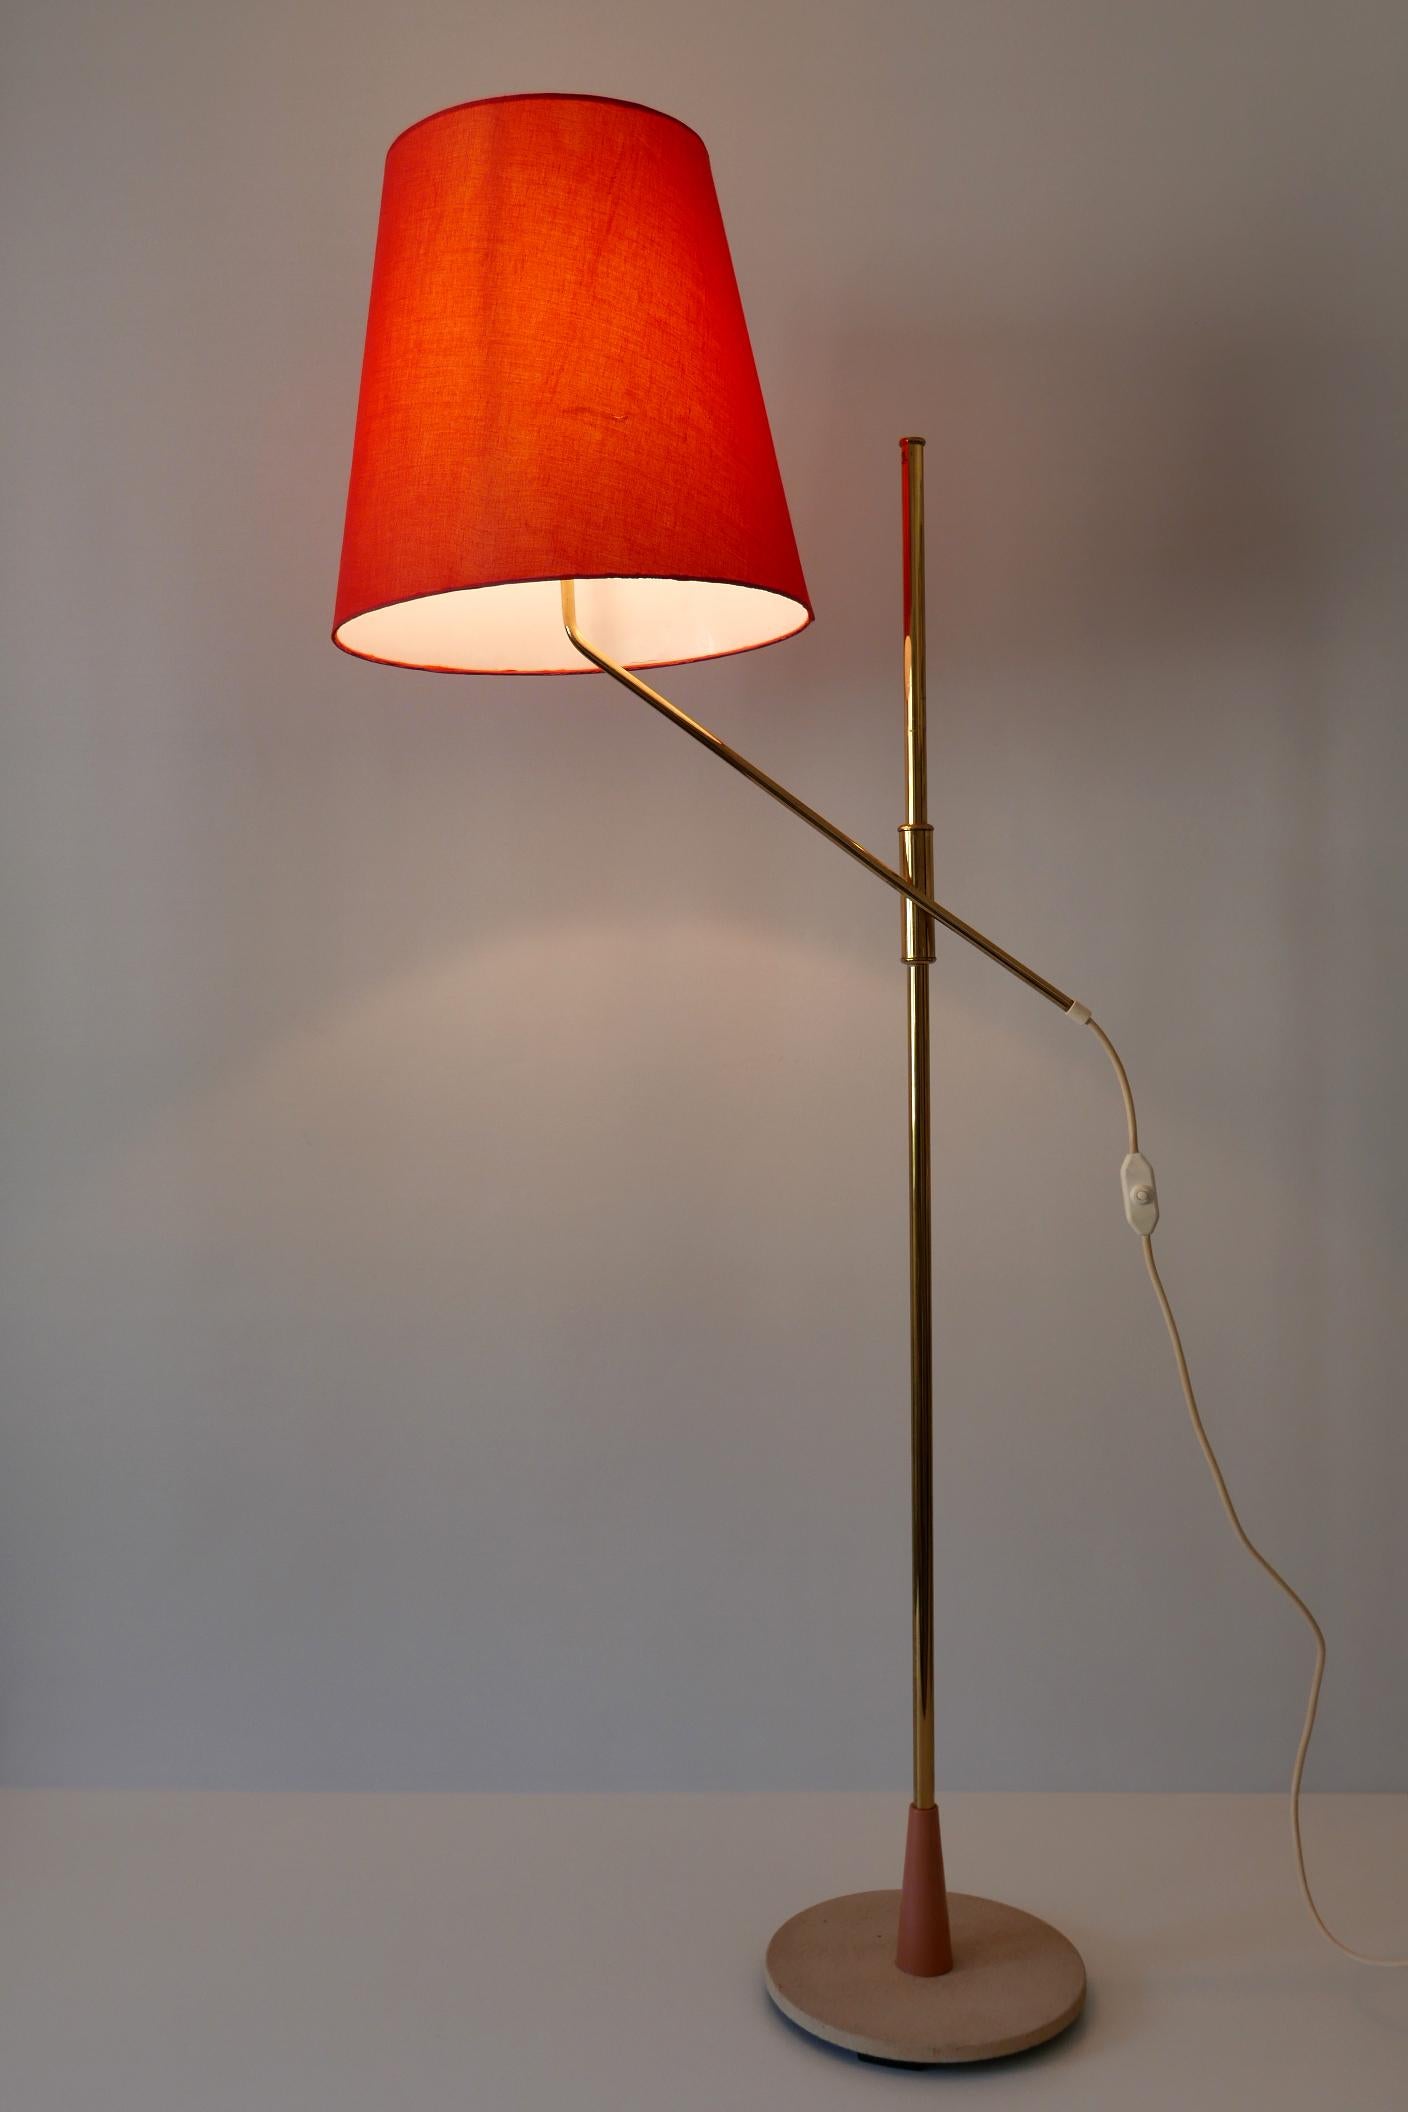 Exceptional, Elegant and Adjustable Mid-Century Modern Floor Lamp 1950s, Germany For Sale 6